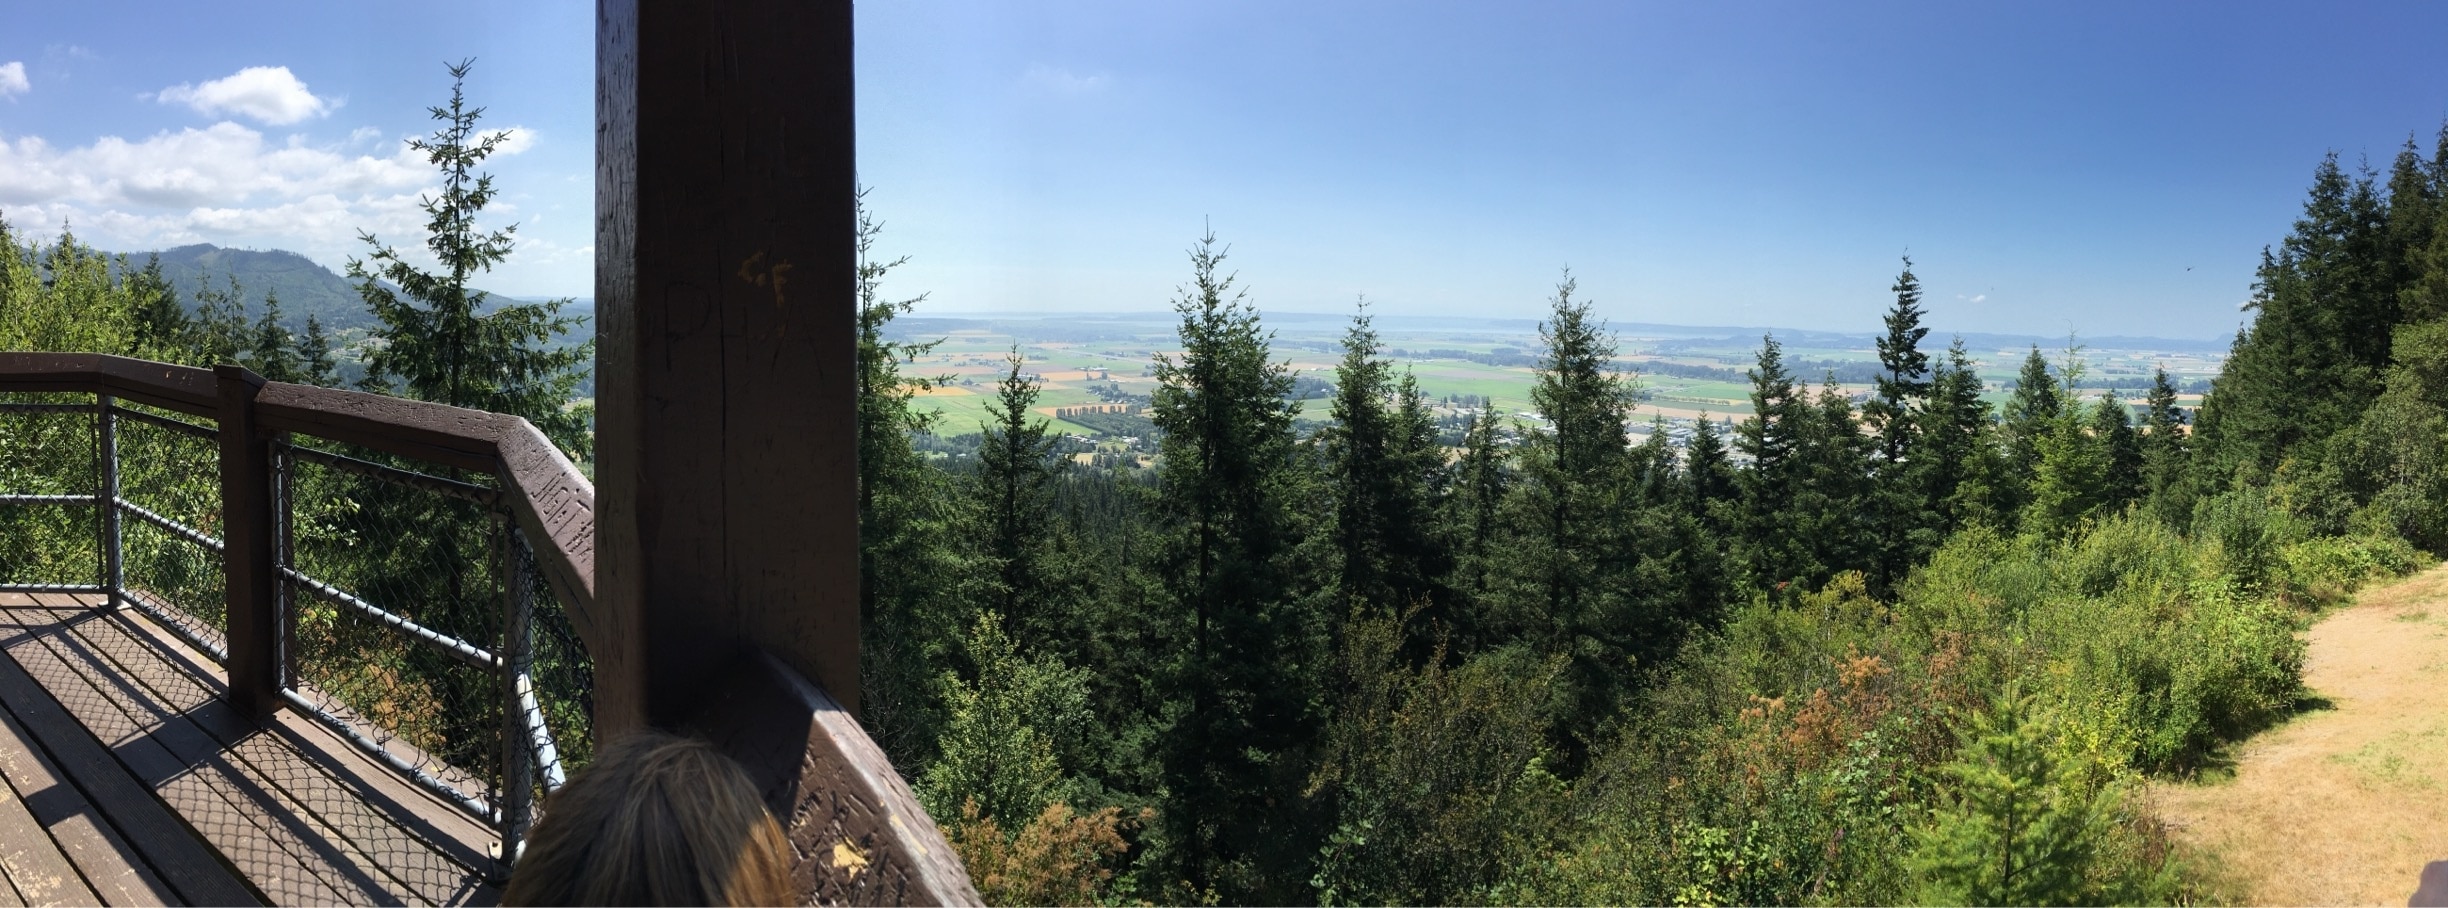 Panoramic of Little Mountain view point over Skagit Valley. Absolutely beautiful 🙏🏼☀️